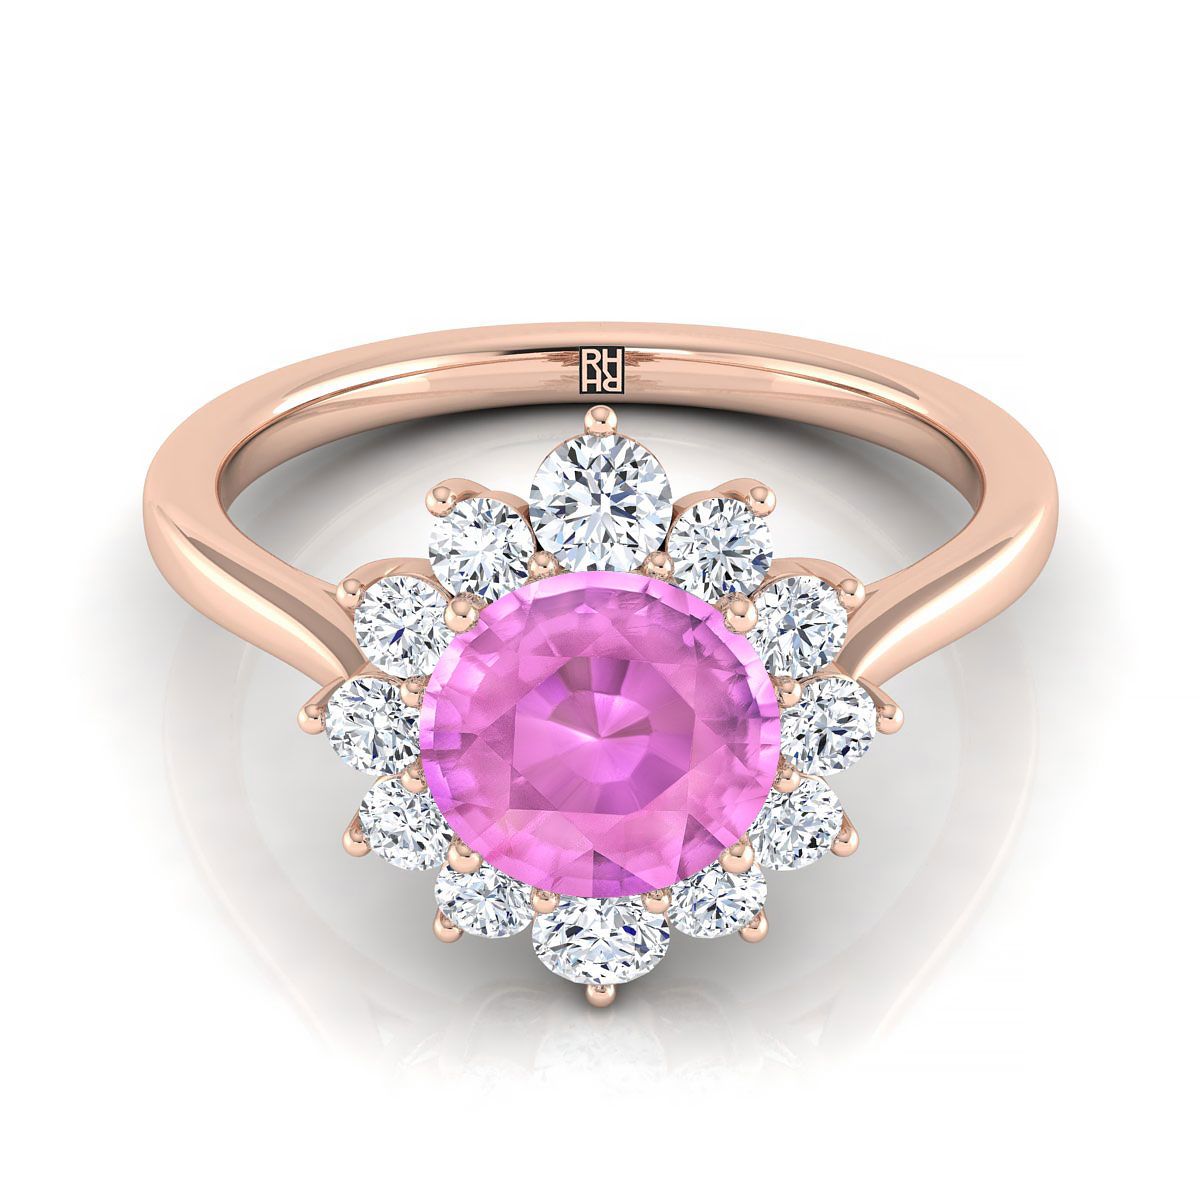 14K Rose Gold Round Brilliant Pink Sapphire Floral Diamond Halo Engagement Ring -1/2ctw